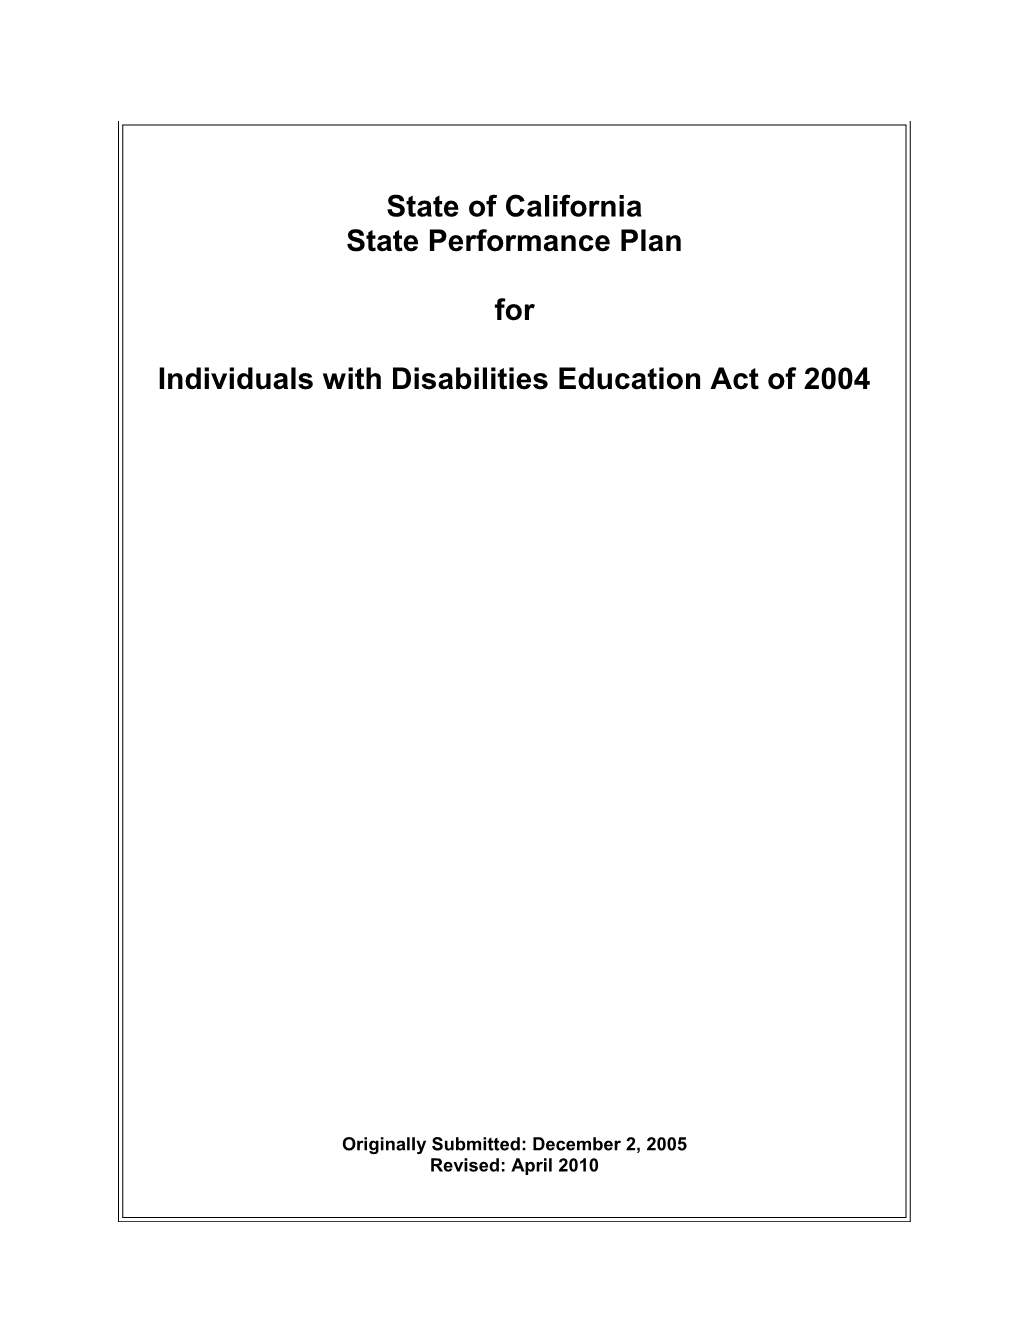 Consolidated SPP - Quality Assurance Process (CA Dept of Education)